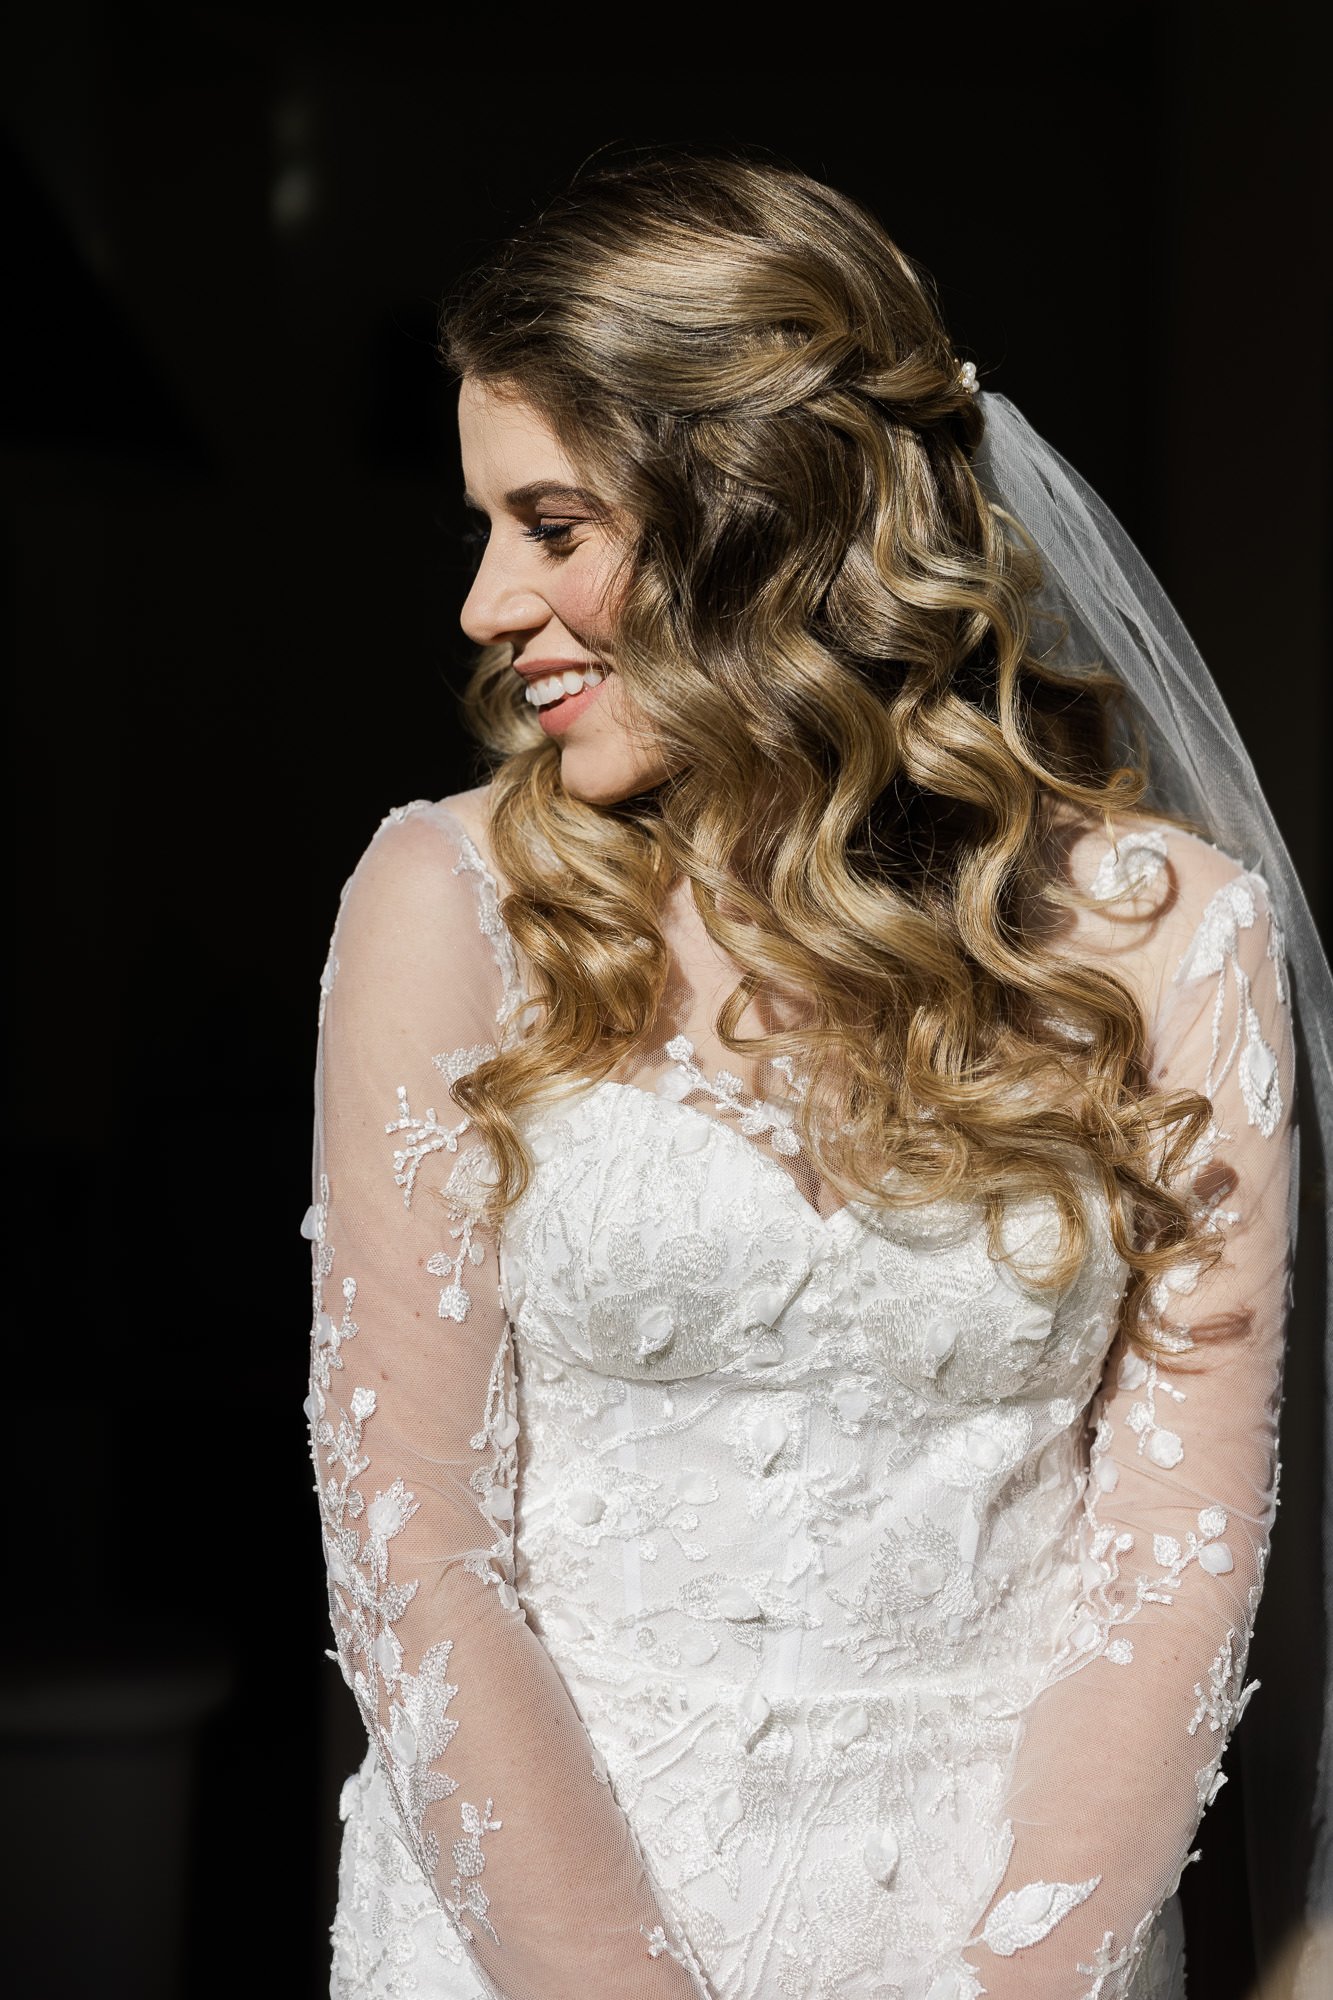 bride in wedding dress and veil looks over shoulder and smiles